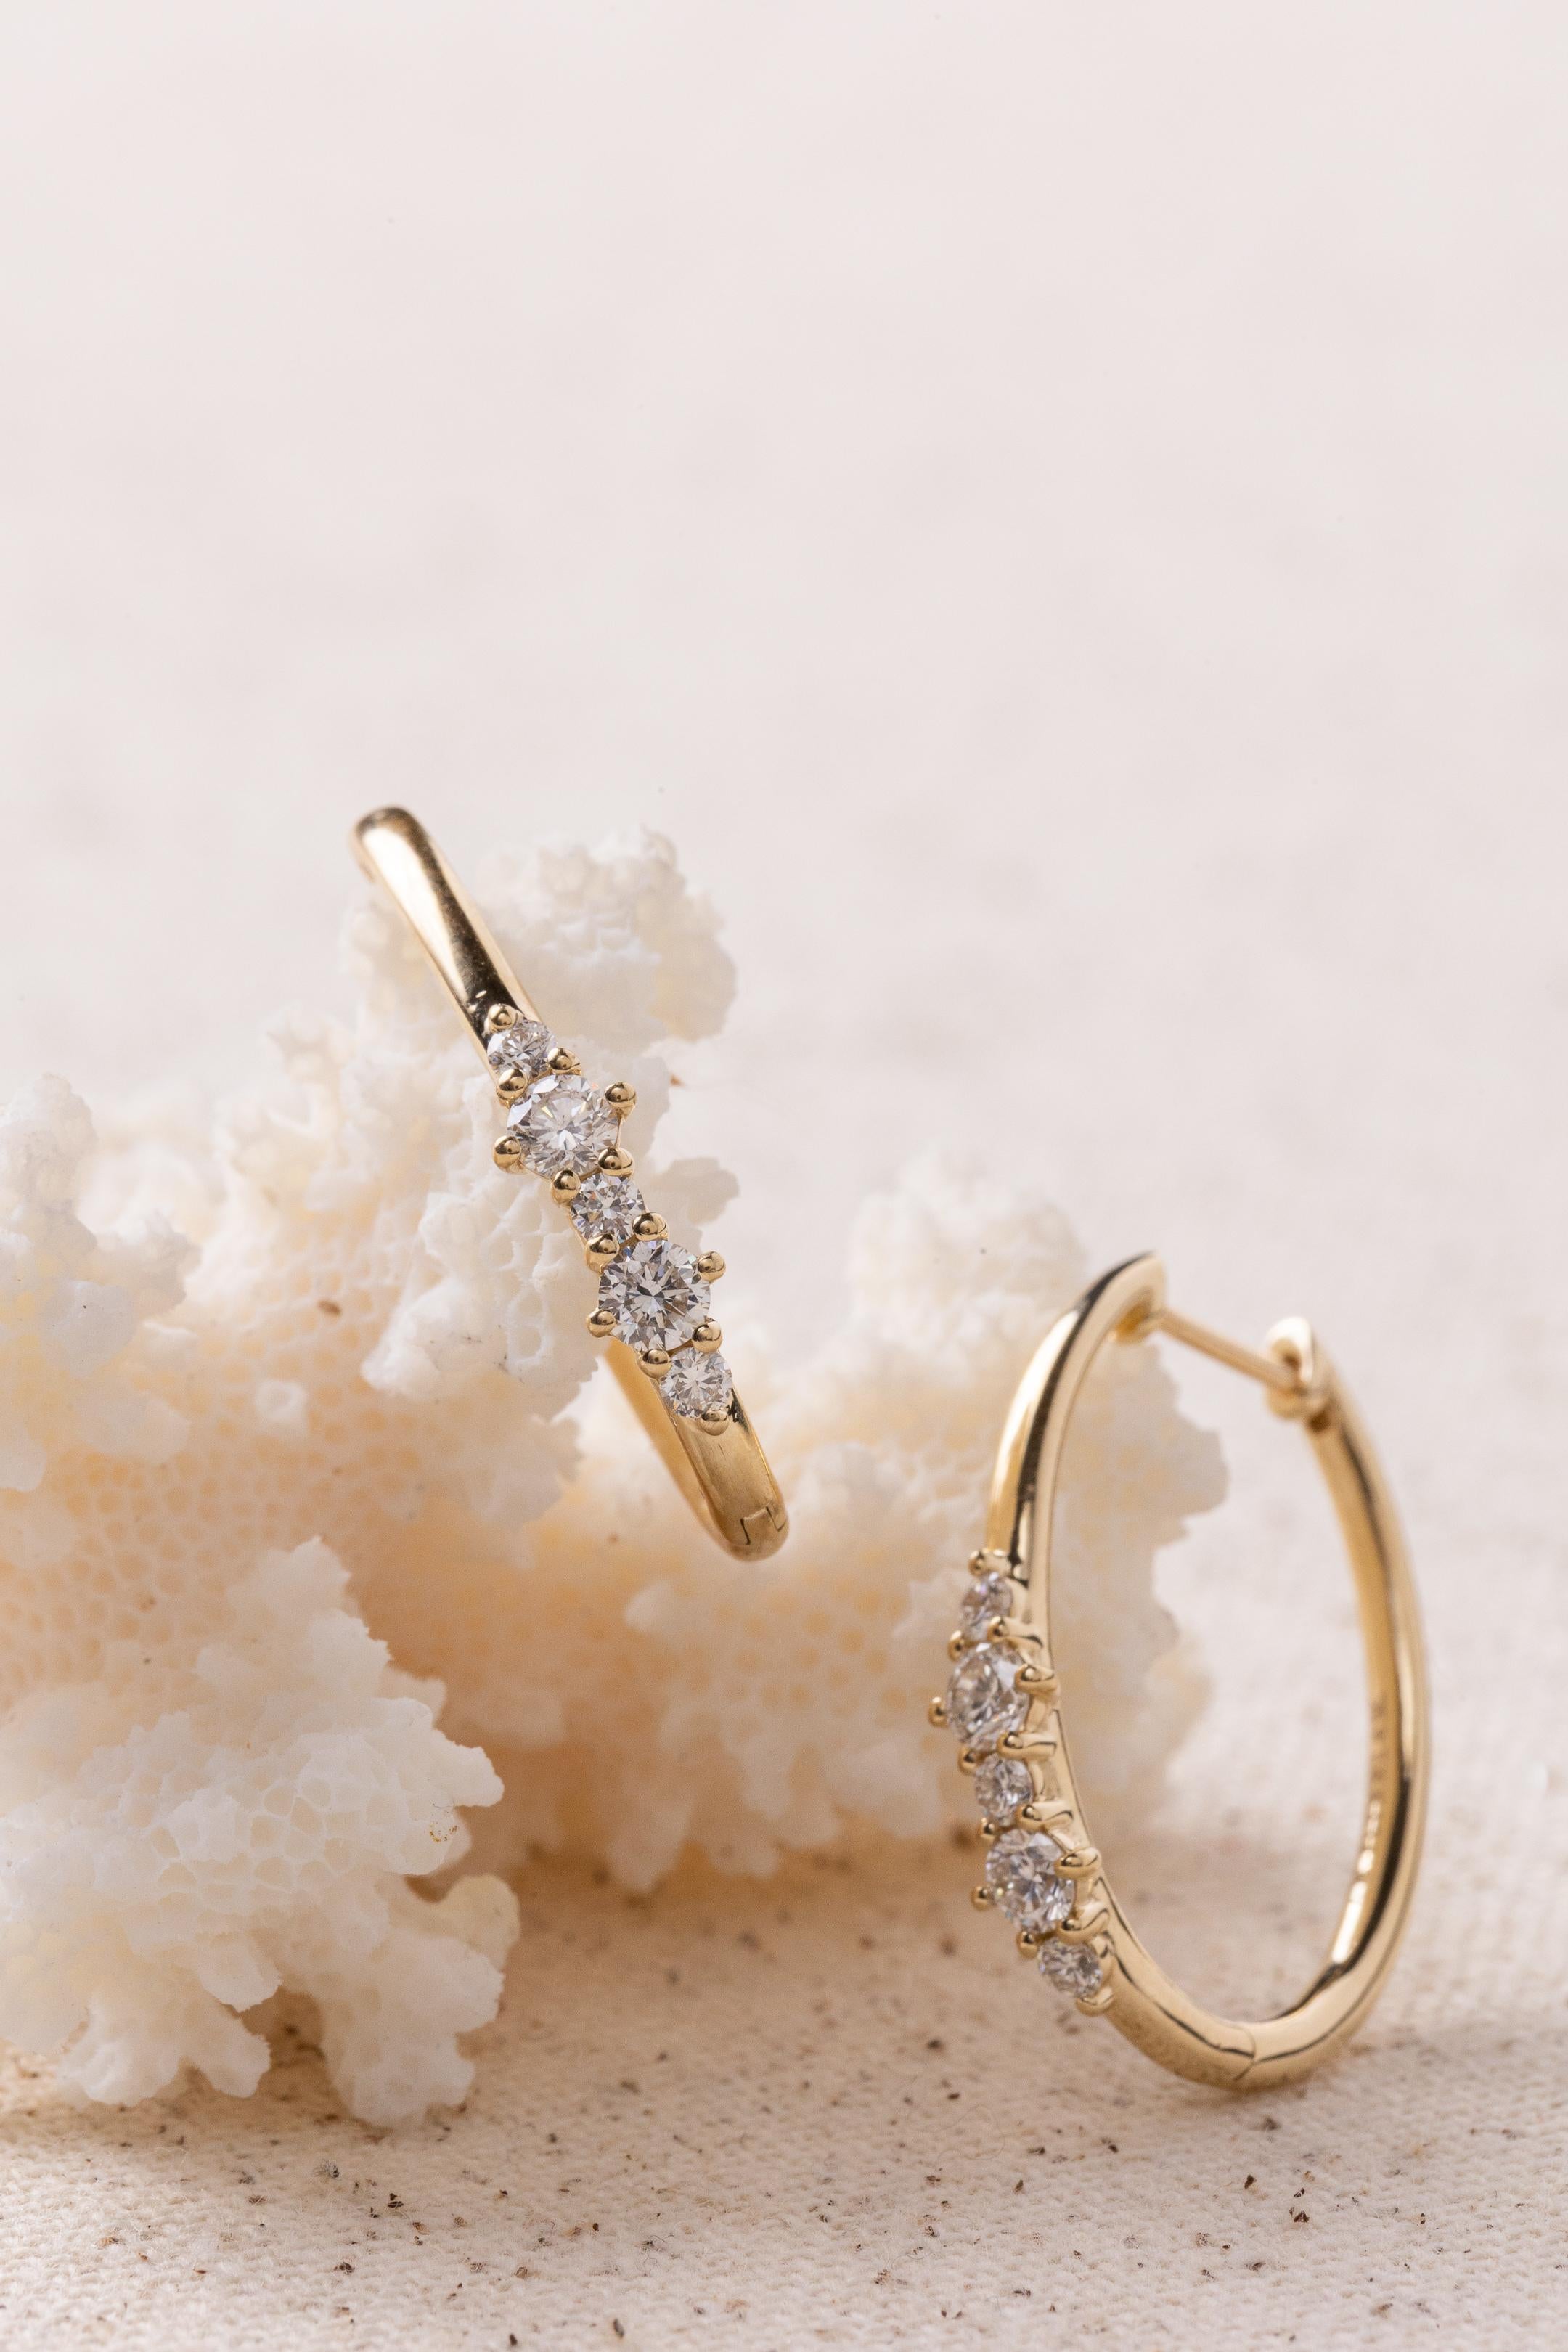 The Large Ava Partial Diamond Hoops are sparkly stunners that you won’t want to take off (ever).

Sold as a pair.